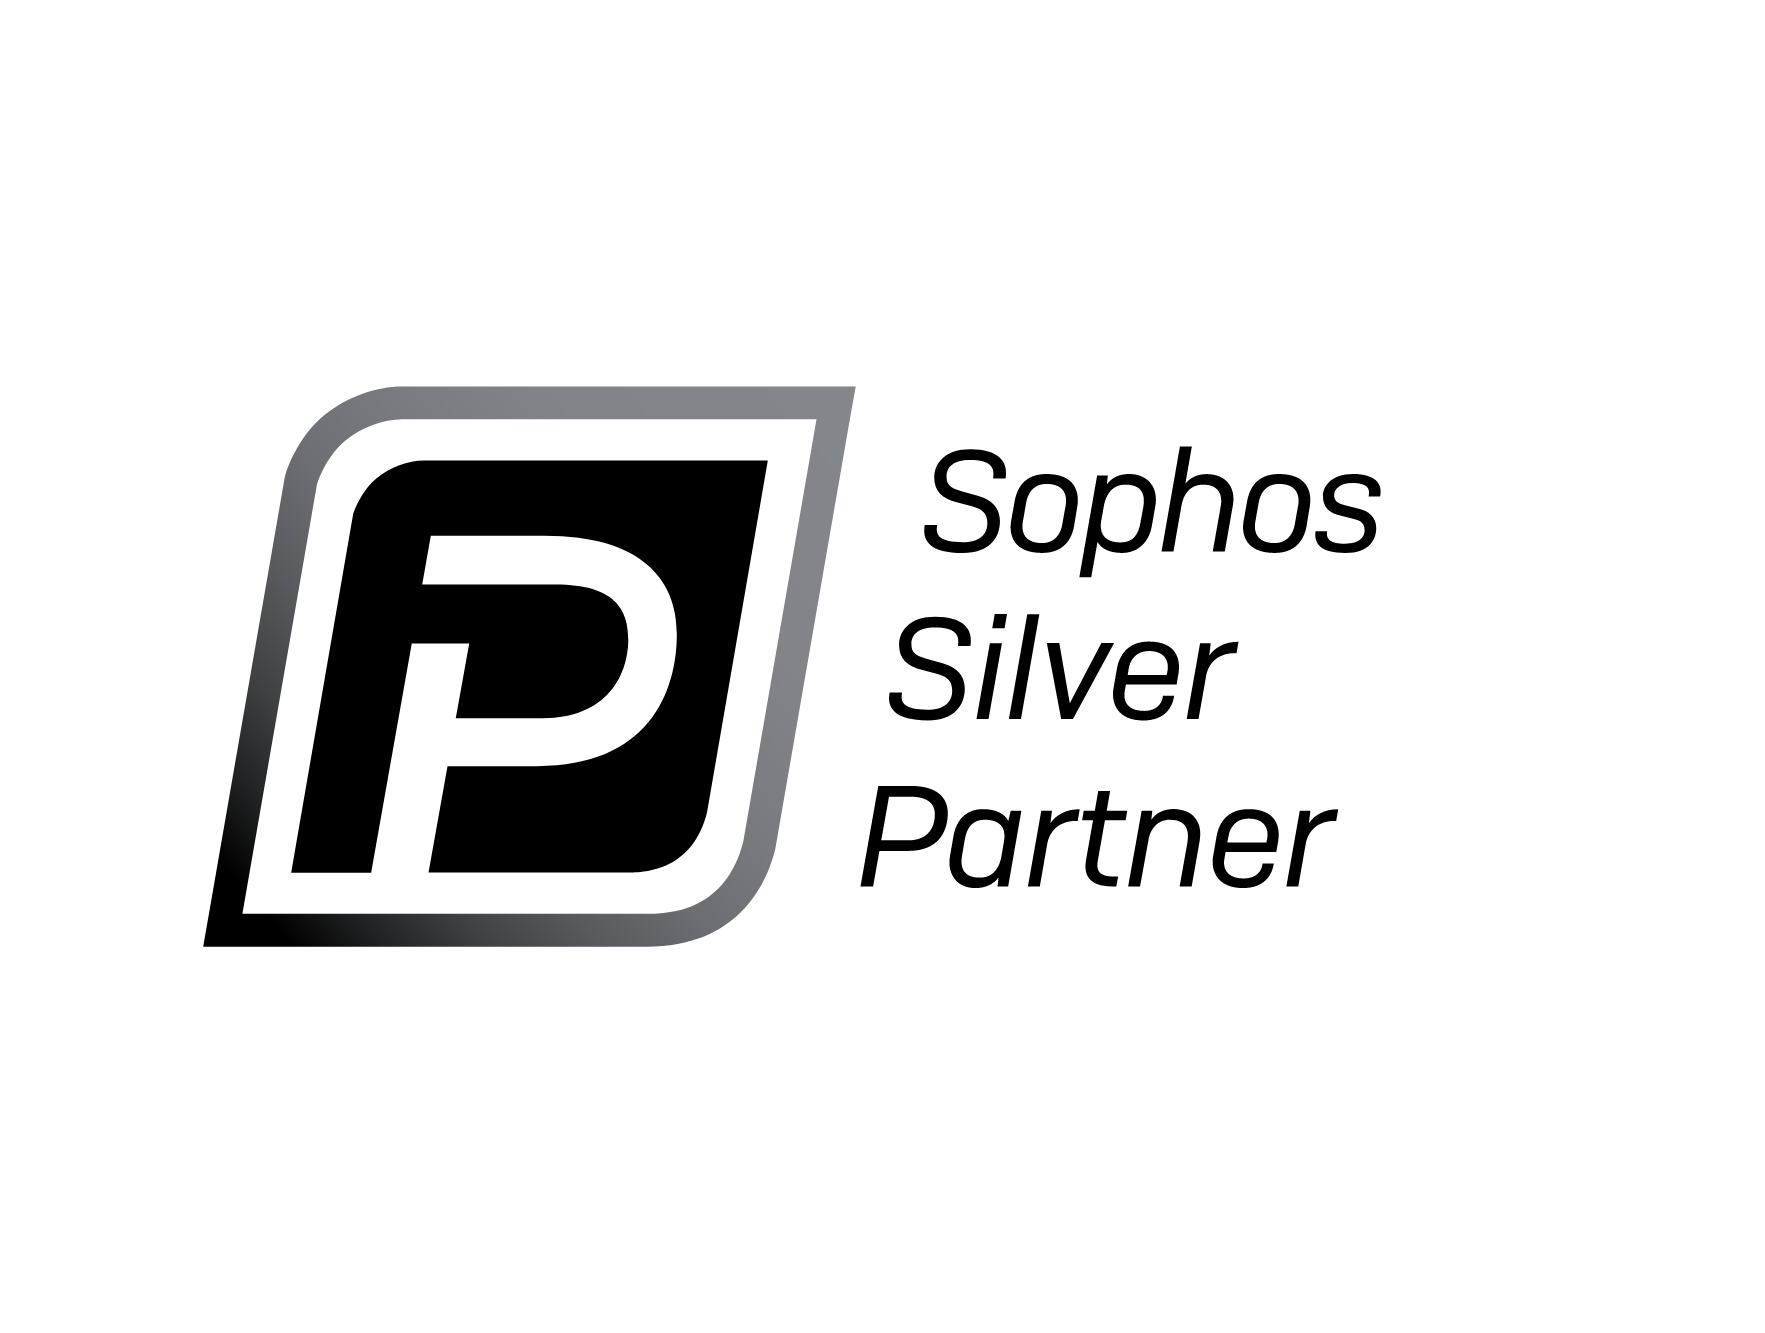 BENEFITS OF SOPHOS SYNCHRONISED SECURITY